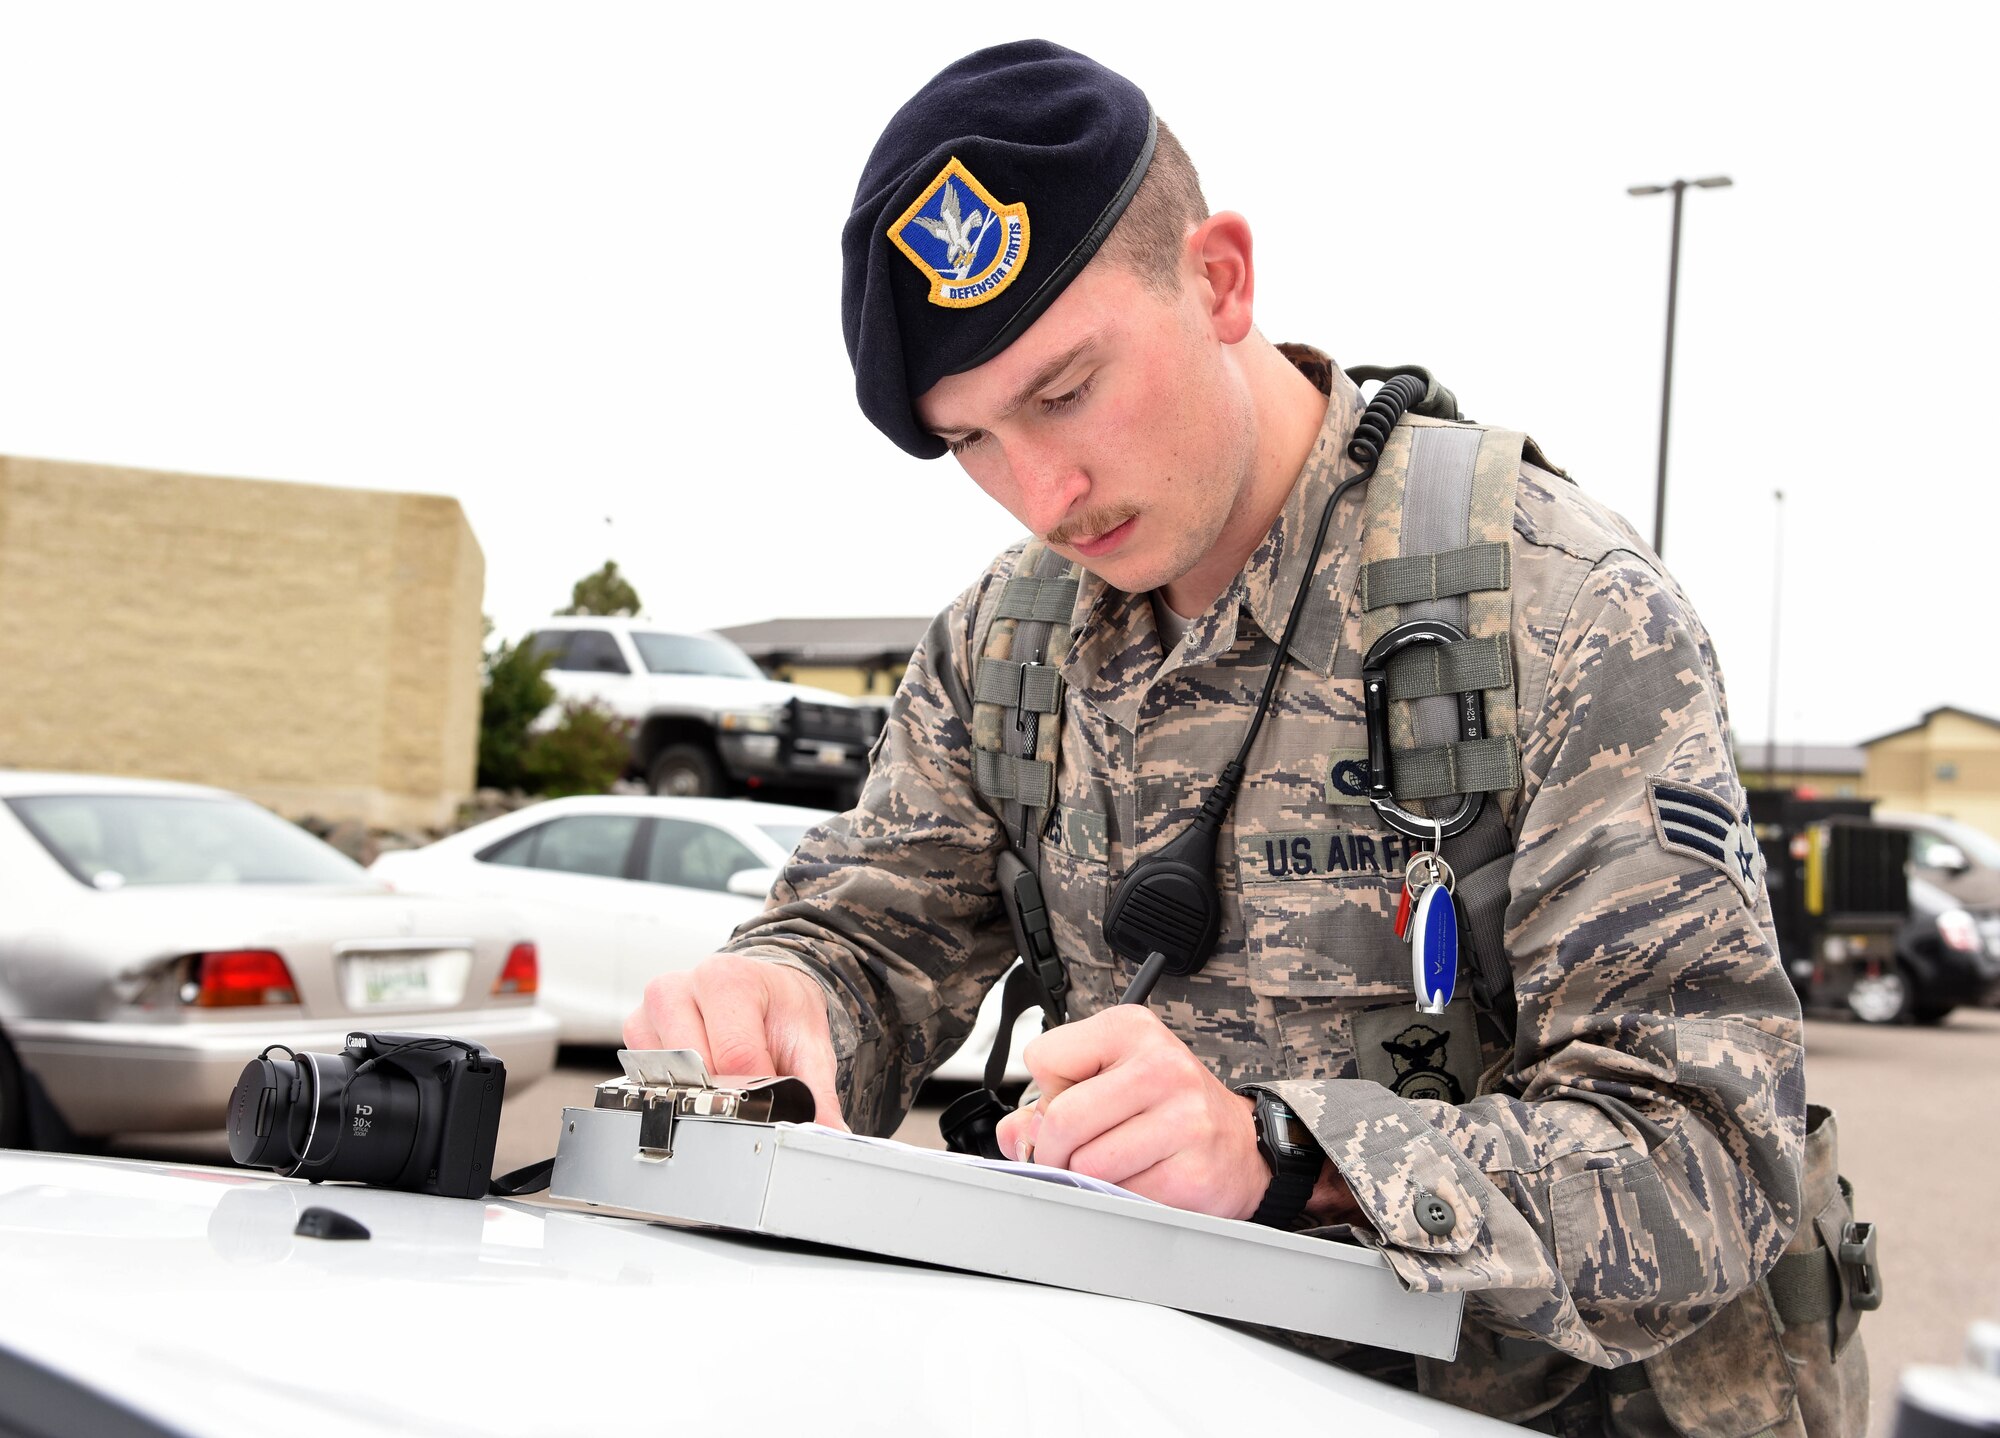 Senior Airman Jonathan James, 341st Security Forces Squadron installation patrolman, writes a citation May 23, 2016, at Malmstrom Air Force Base, Mont. James has been in the Air Force for five years, and joined because of the stories his grandfather, one of the first pararescumen, would tell him. (U.S. Air Force photo/Senior Airman Jaeda Tookes)